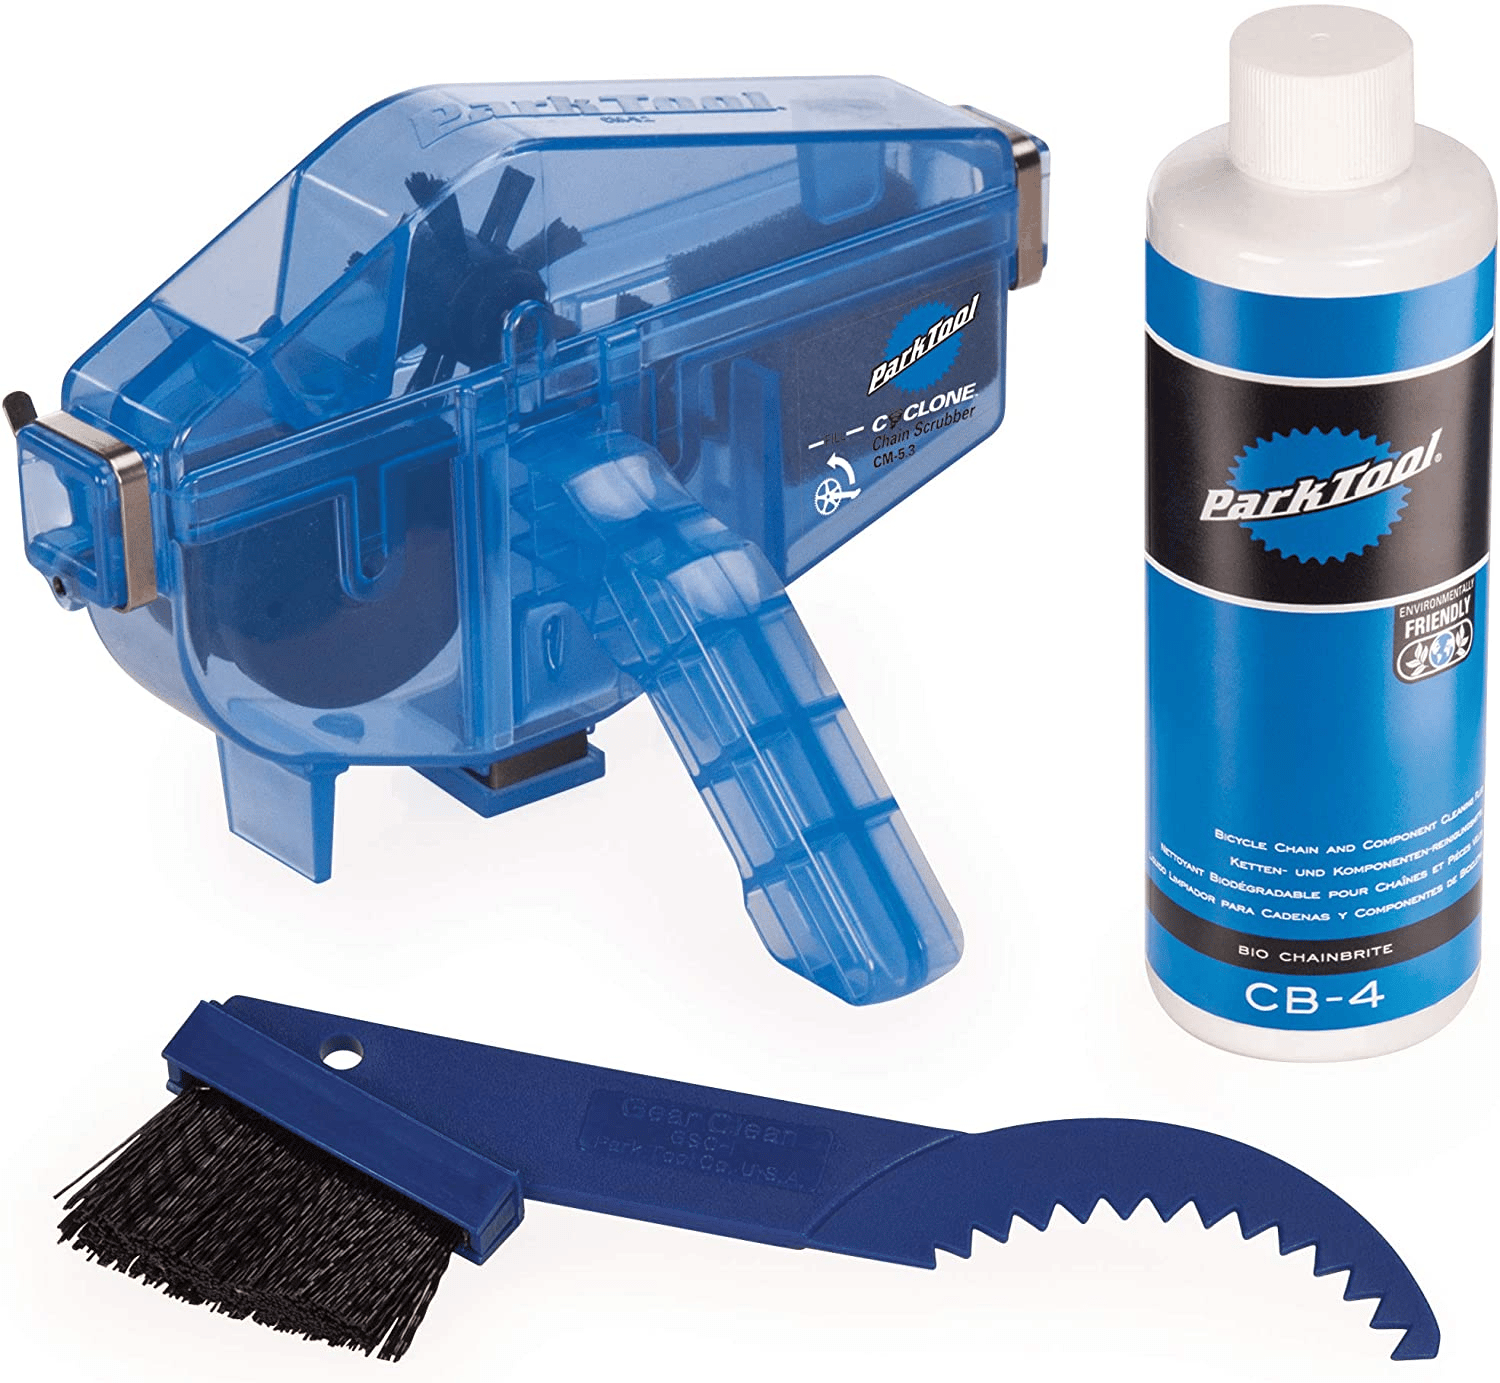 Cleaning your mountain bike chain with a kit like this is a very important part of maintaining it and keeping it working smoothly.